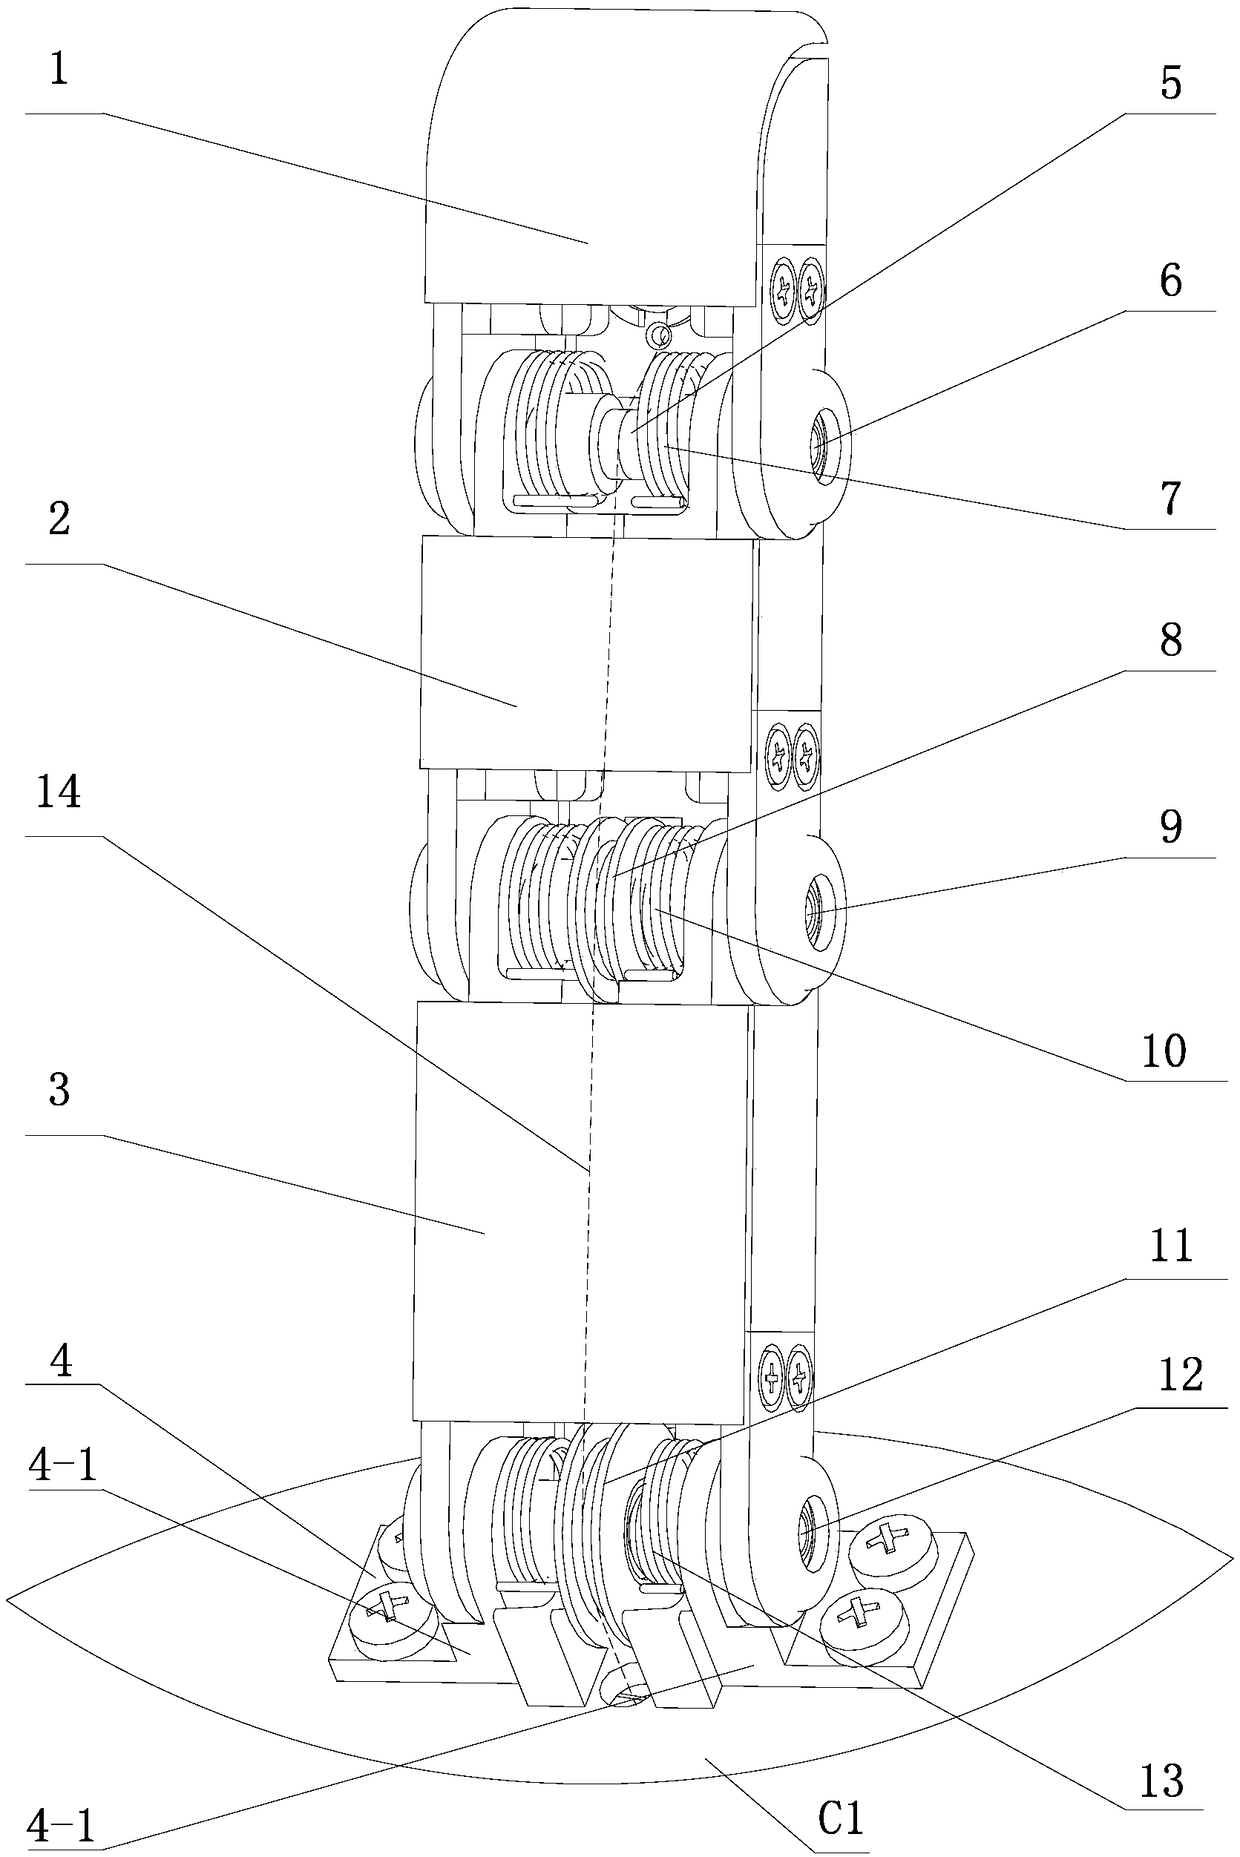 Underactuated variable-stiffness manipulator based on variable-stiffness elastic joints